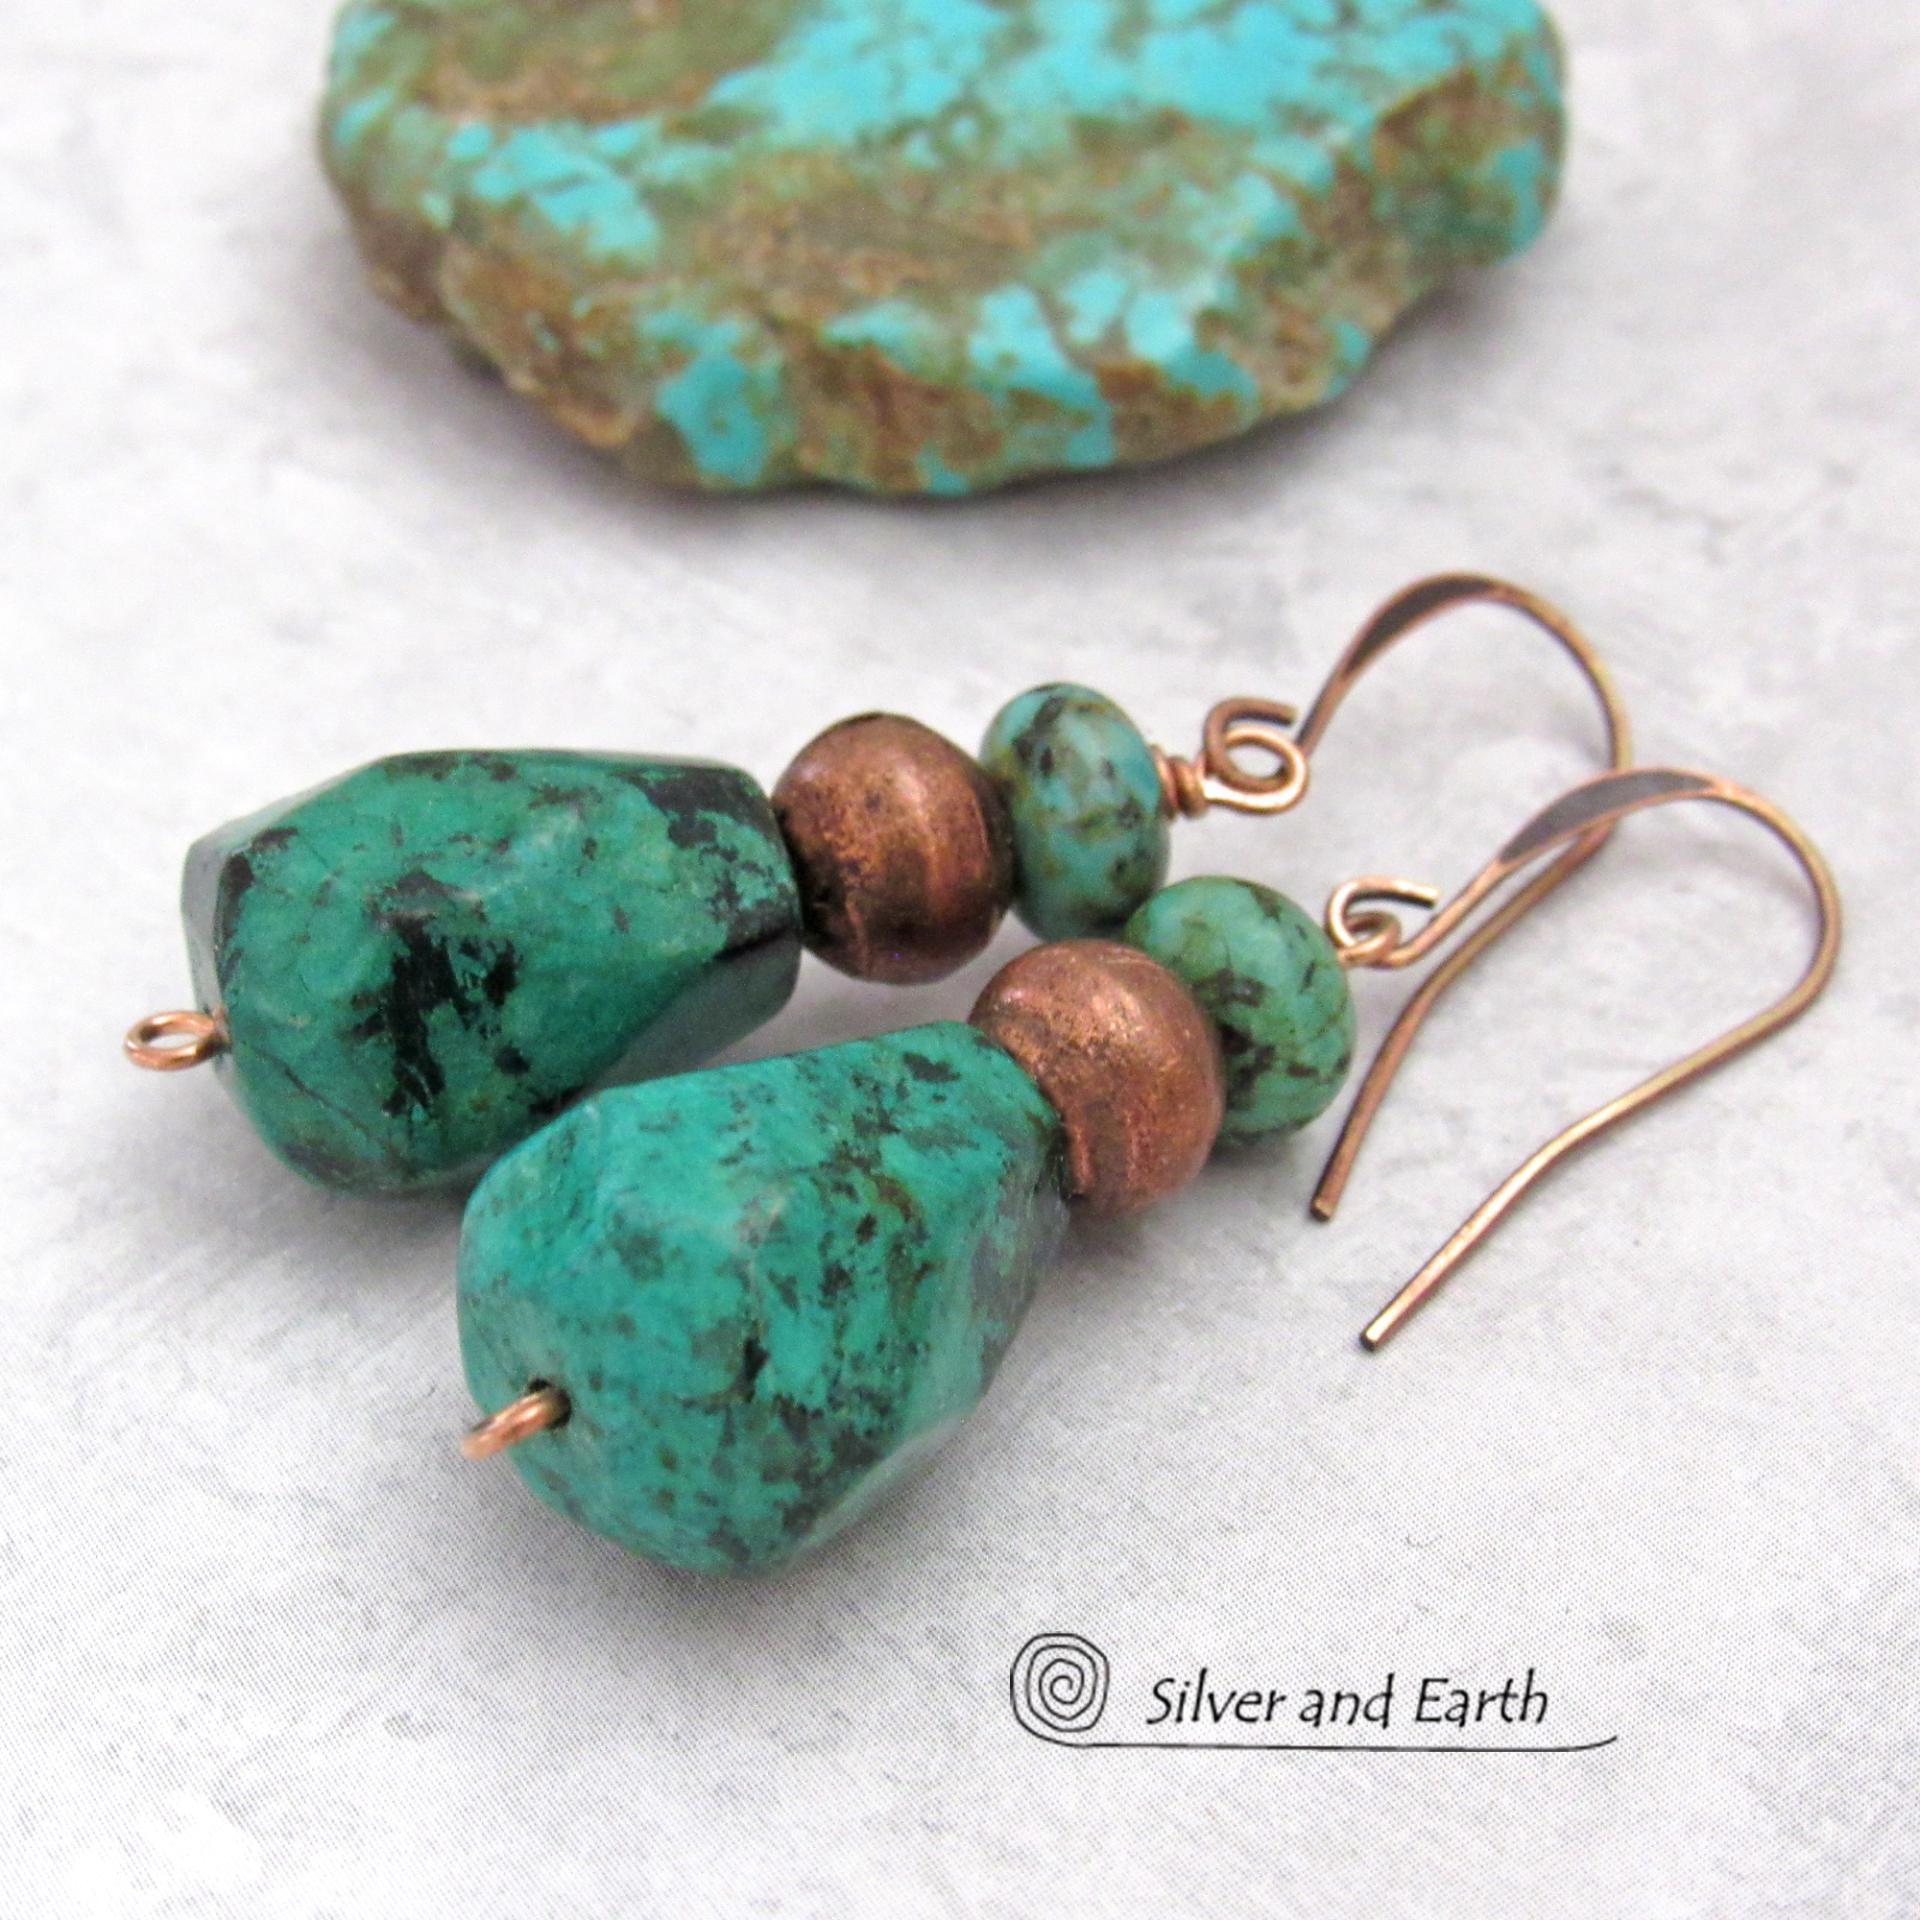 Chunky African Turquoise Stone Earrings with Copper Beads - Modern Boho Earthy Natural Gemstone Jewelry